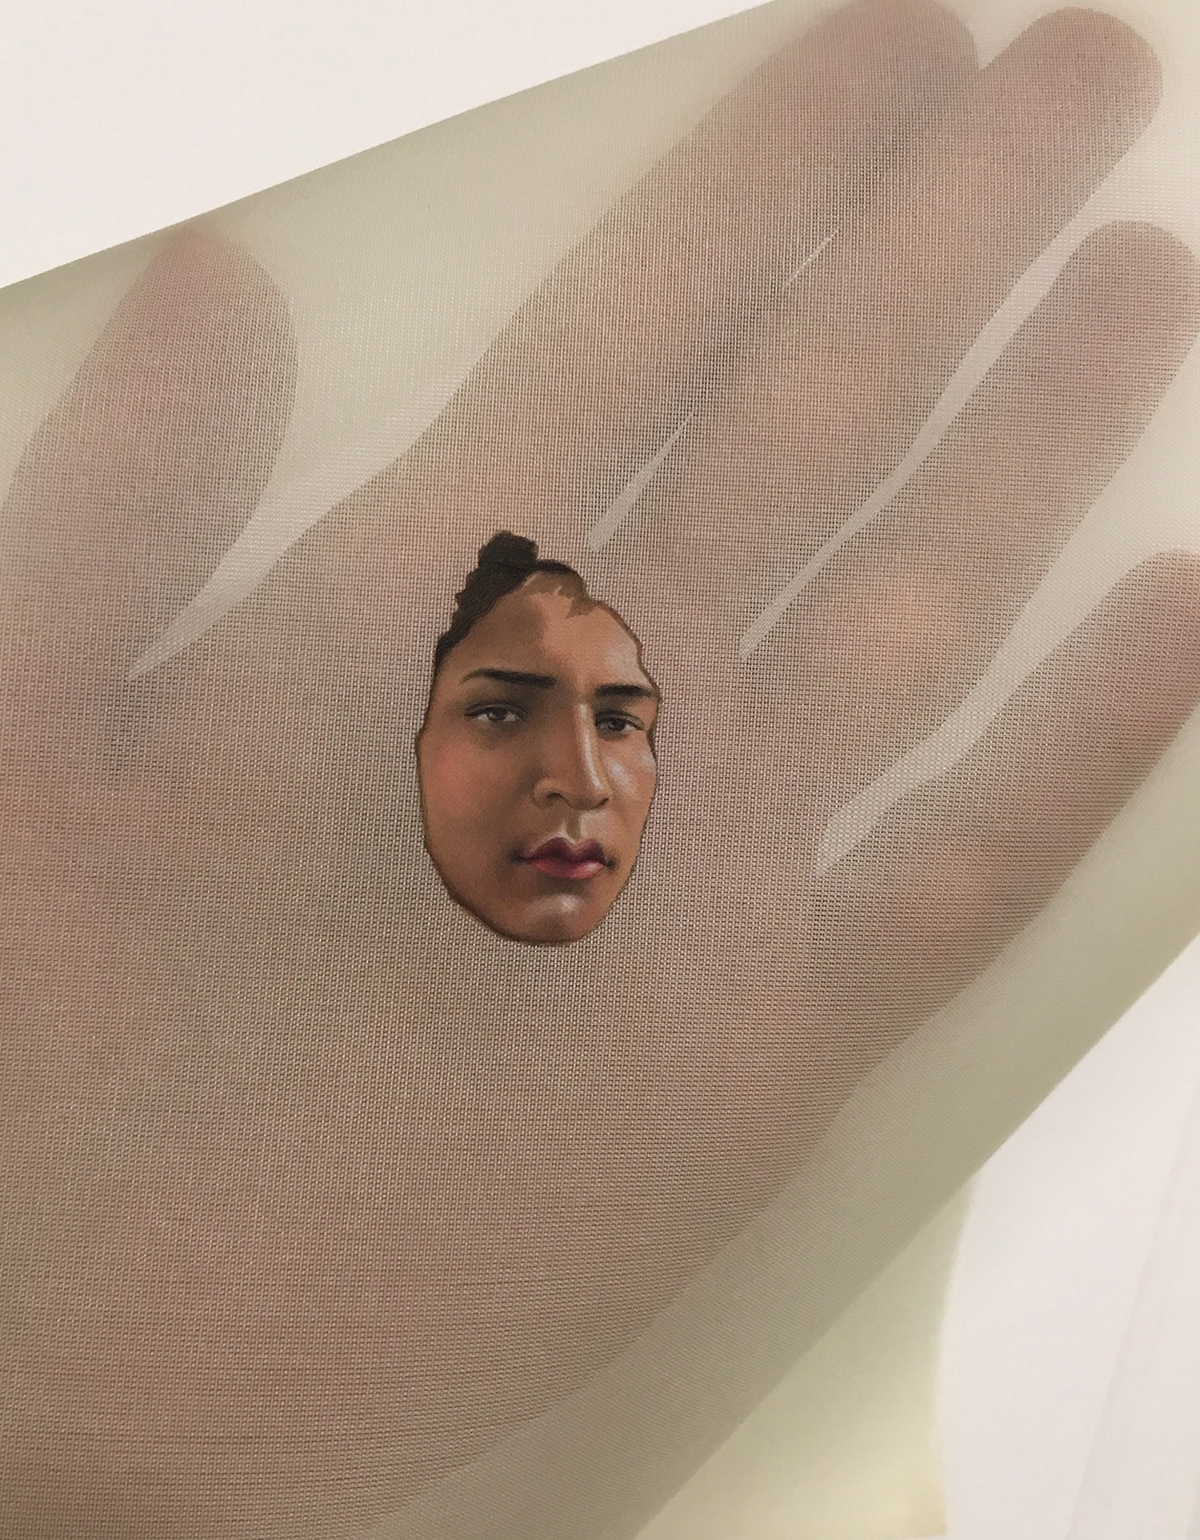 A hand is covered in a gauzy fabric. In the palm of the hand is a small image of a person's face